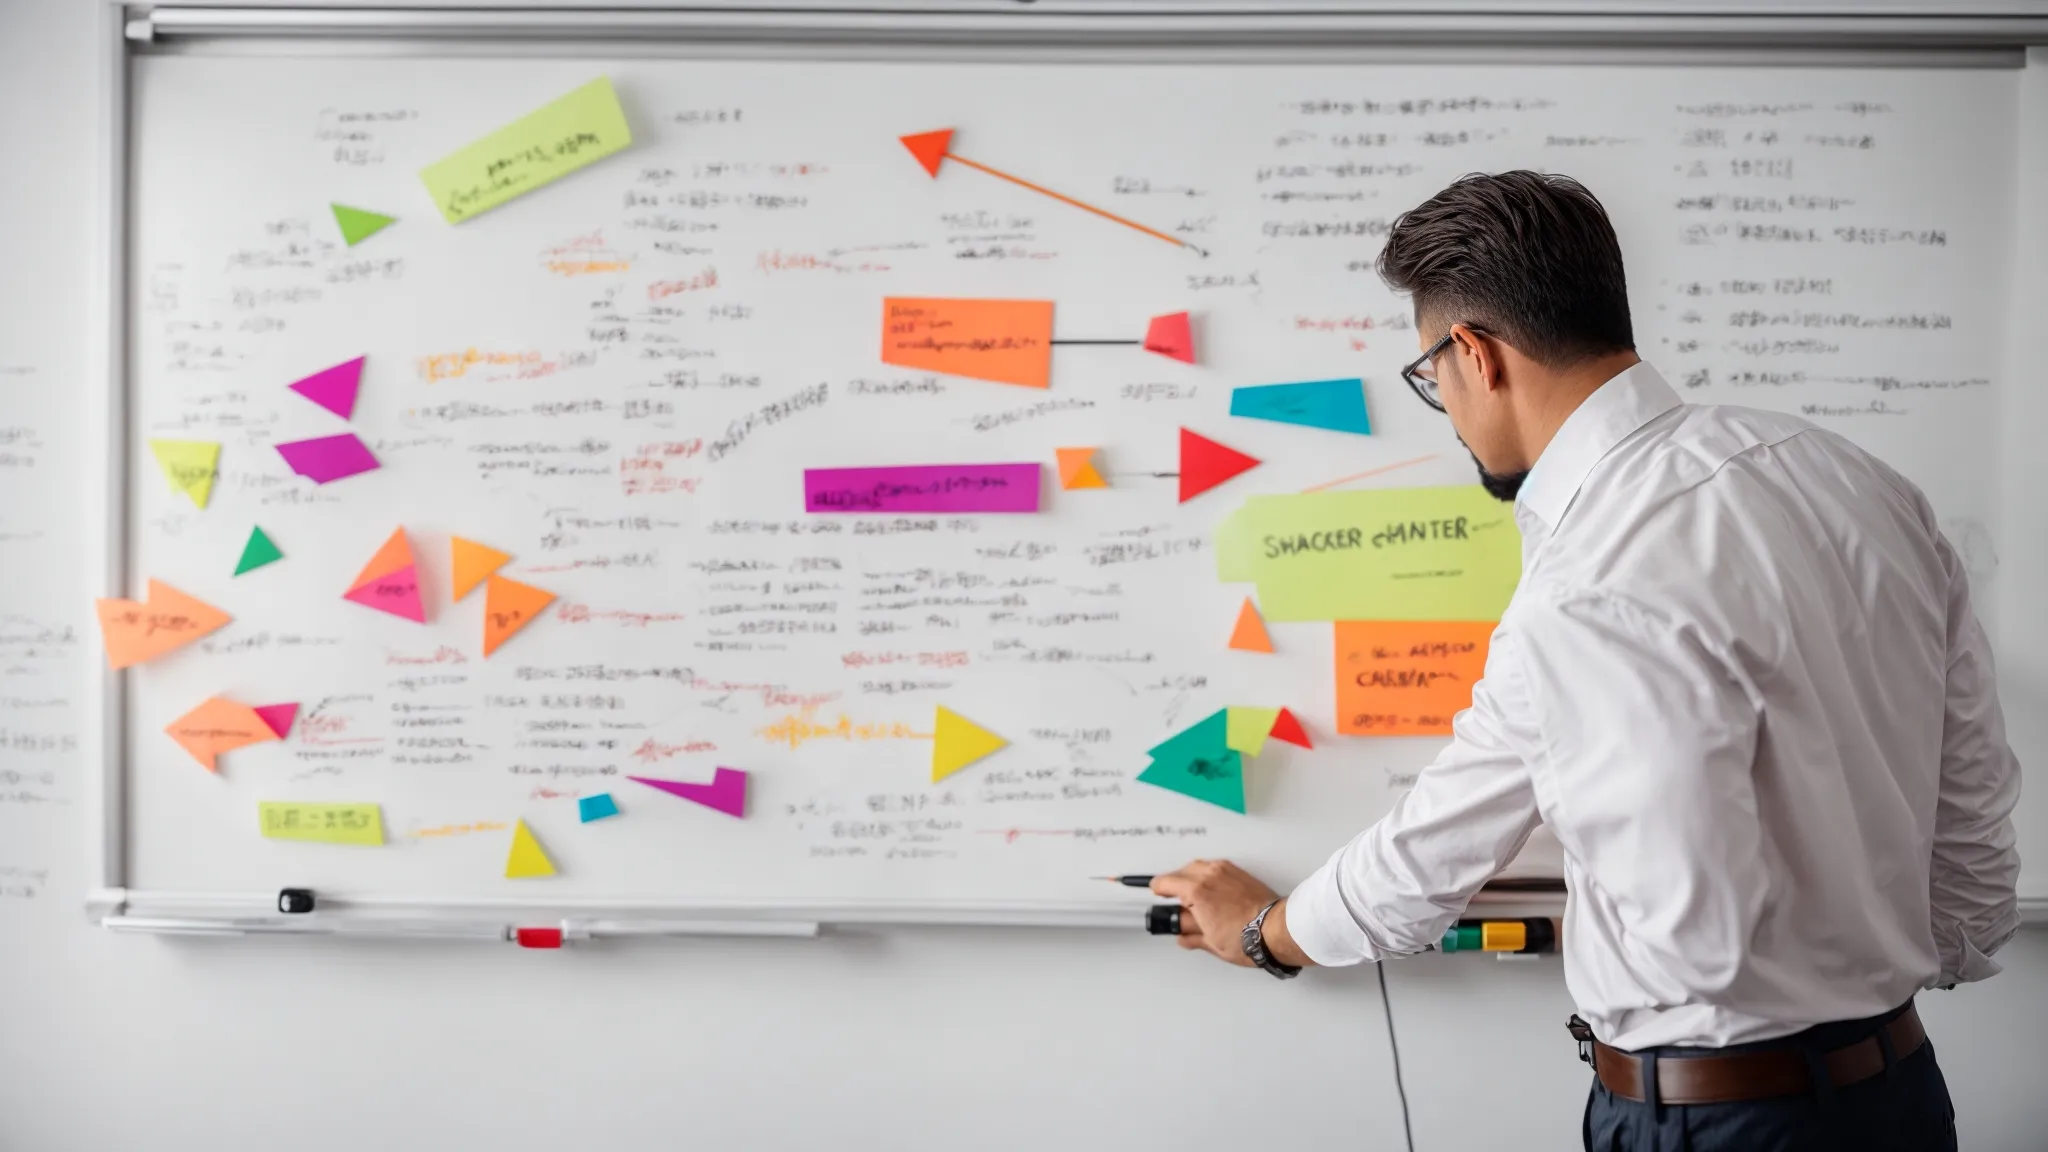 a diligent entrepreneur outlines a strategy on a whiteboard with colorful marker arrows pointing at words representing various market sectors.